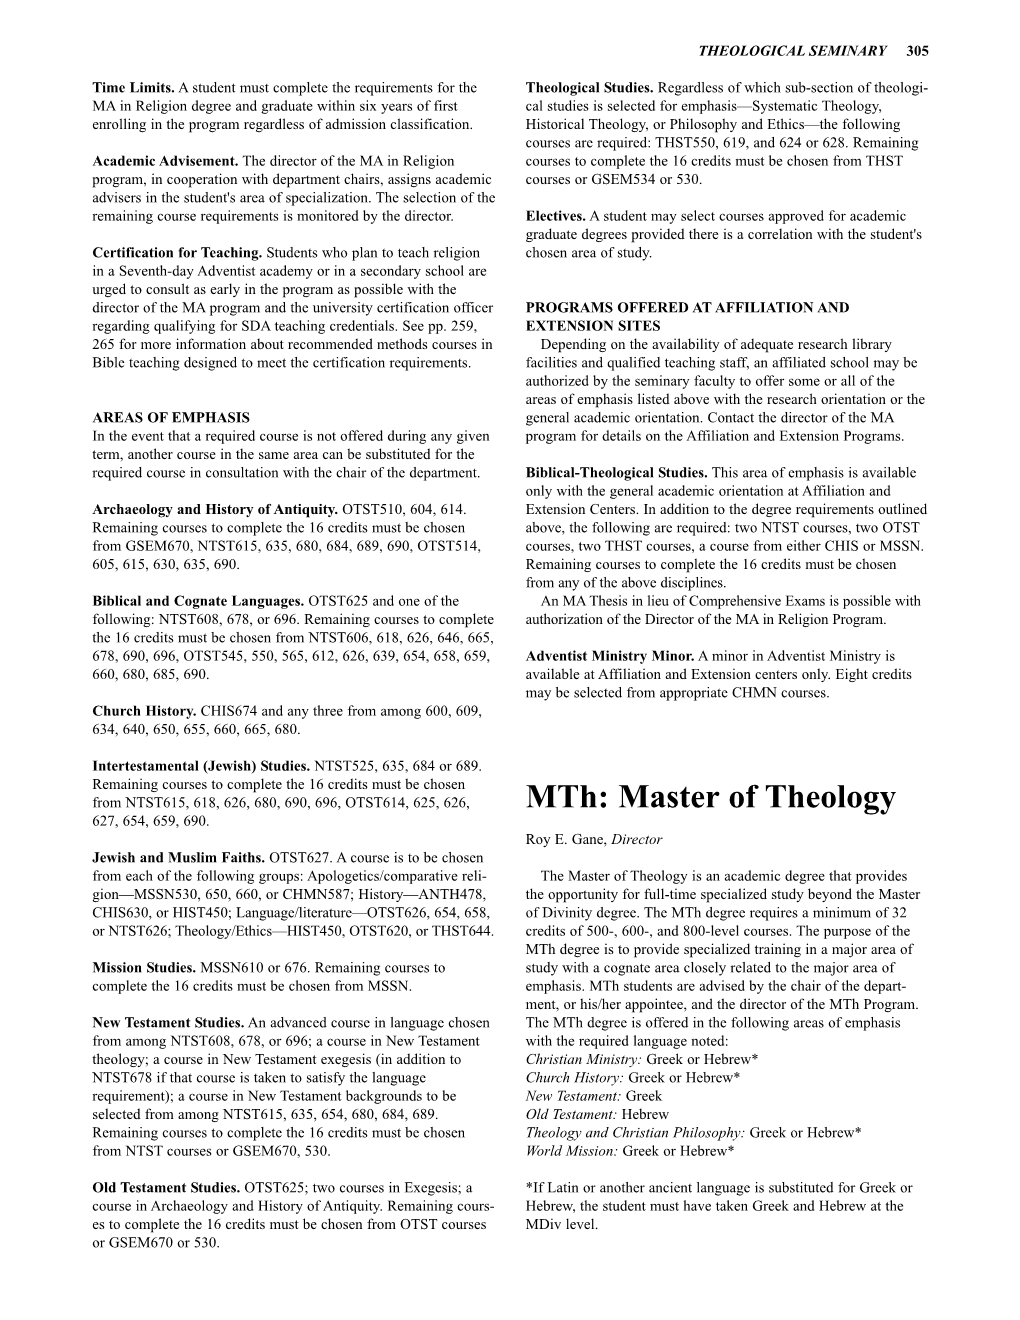 Mth: Master of Theology 627, 654, 659, 690